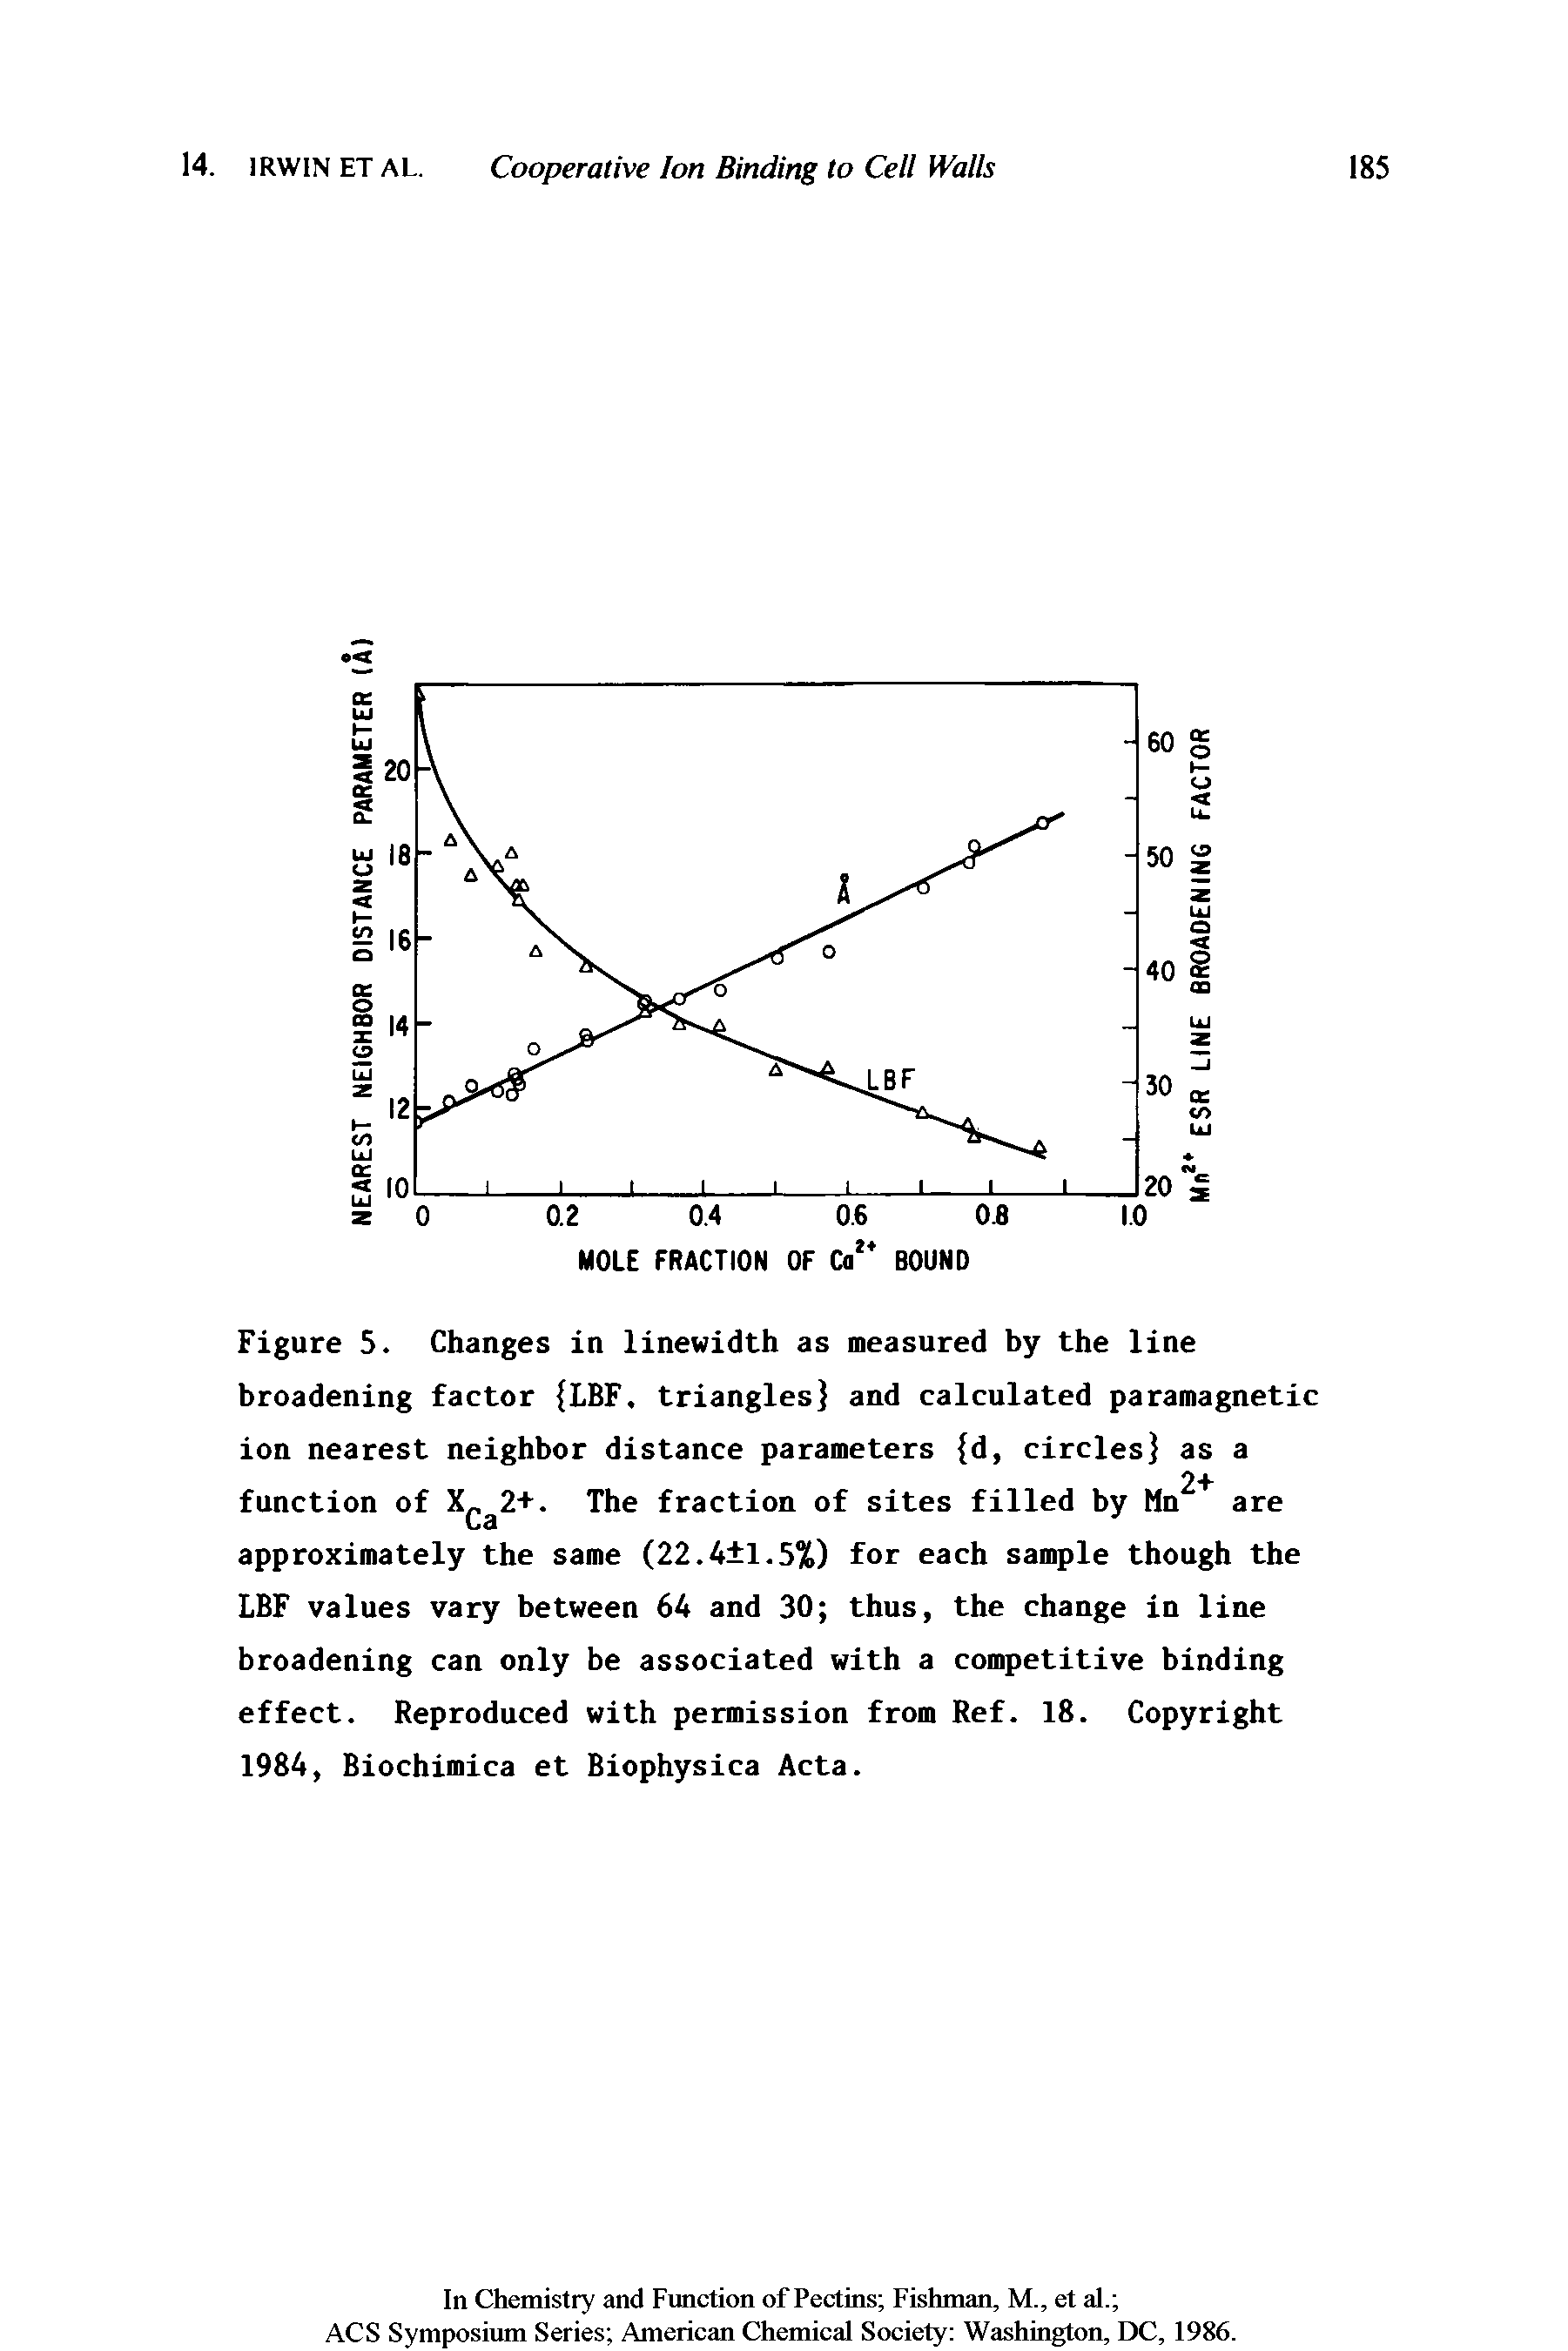 Figure 5. Changes in linewidth as measured by the line broadening factor LBF. triangles and calculated paramagnetic...